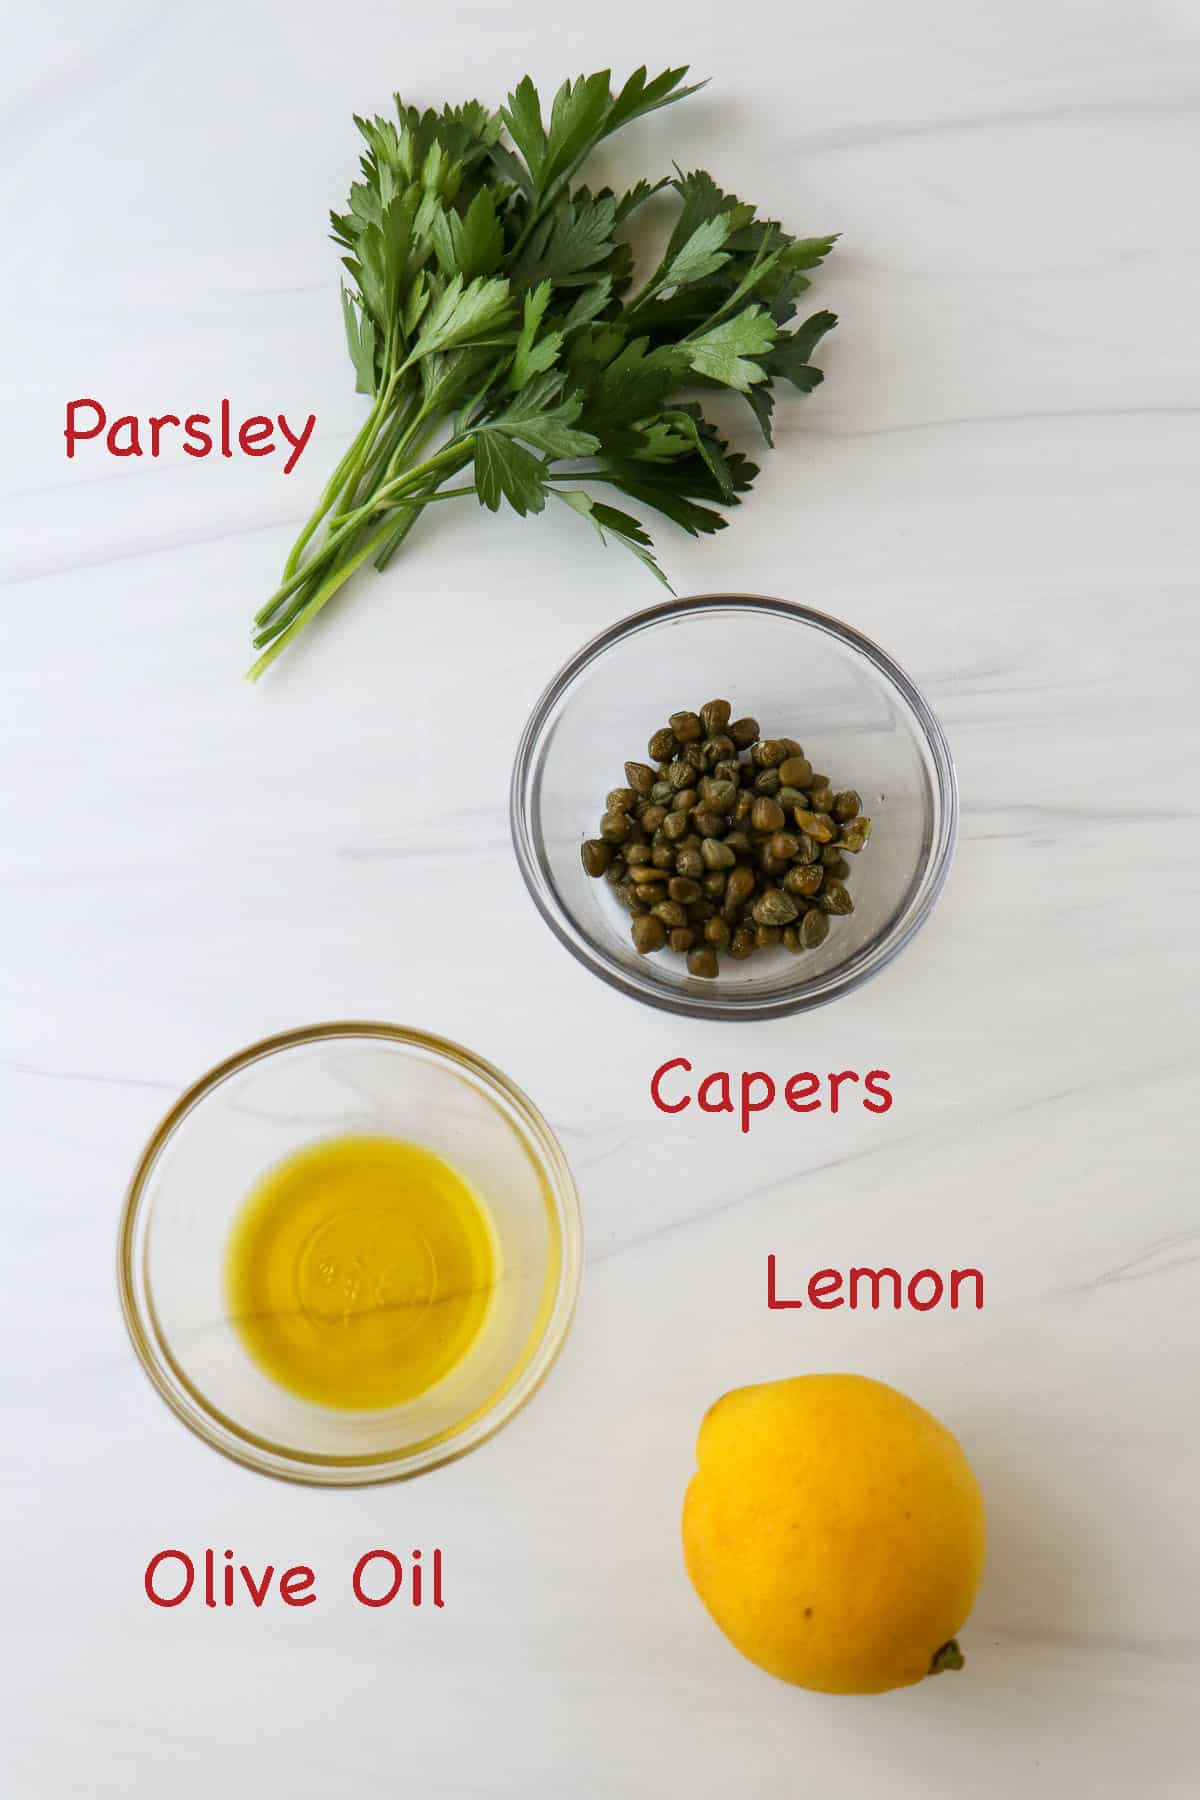 Labeled ingredients for Caper Relish.